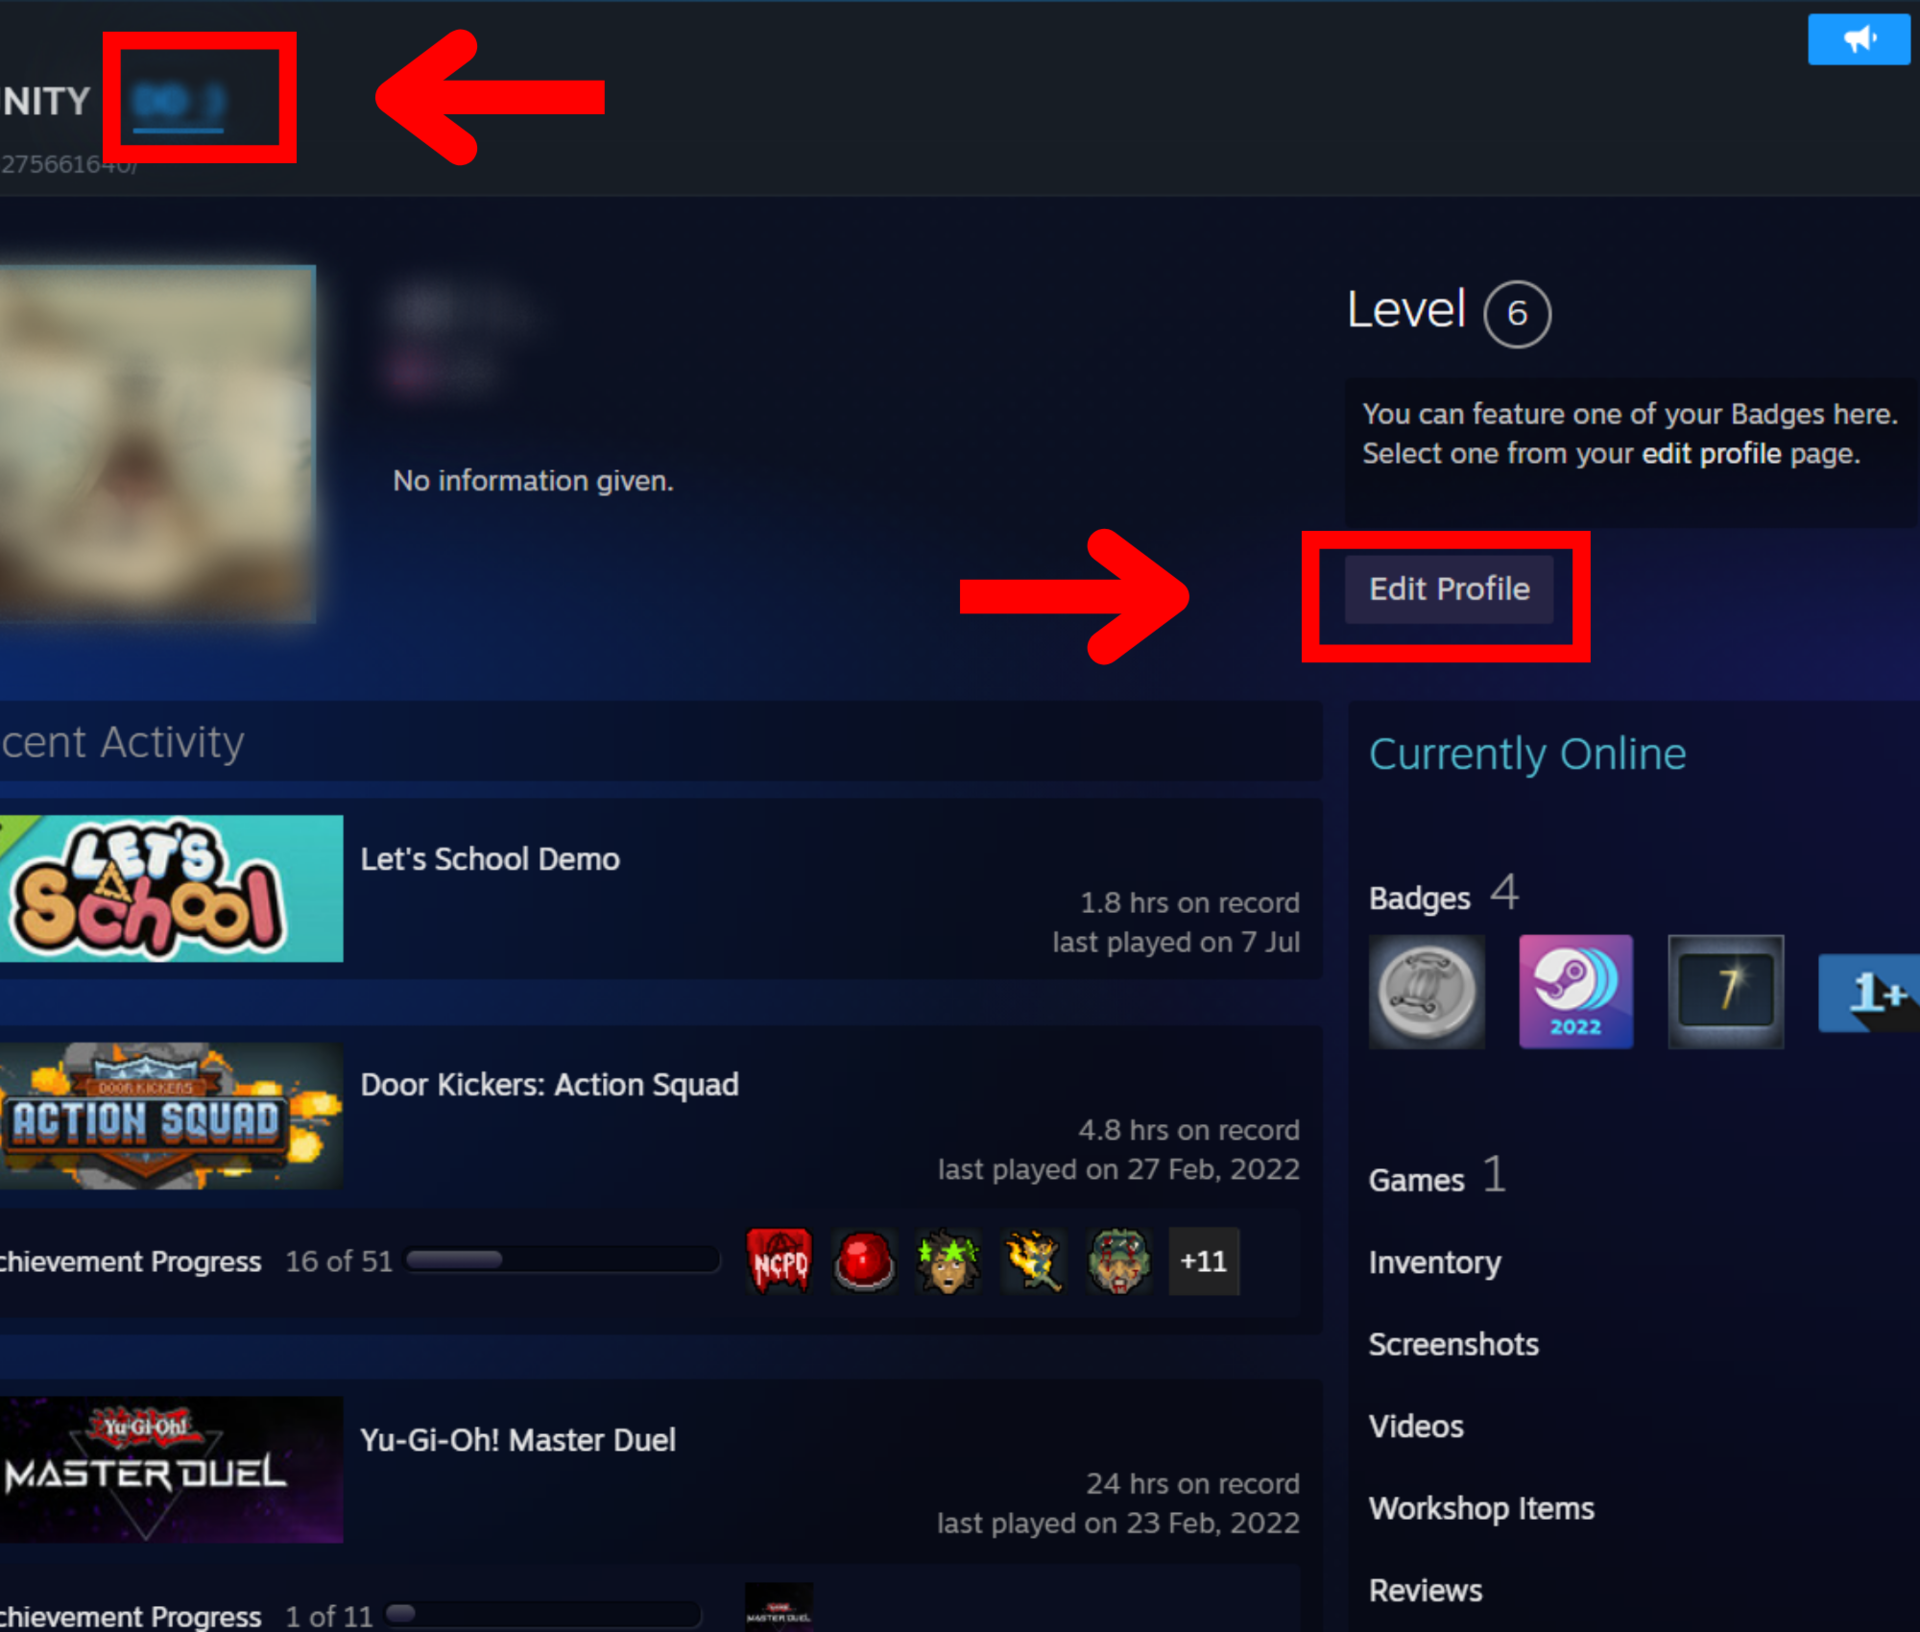 How to find your Steam ID - IONOS